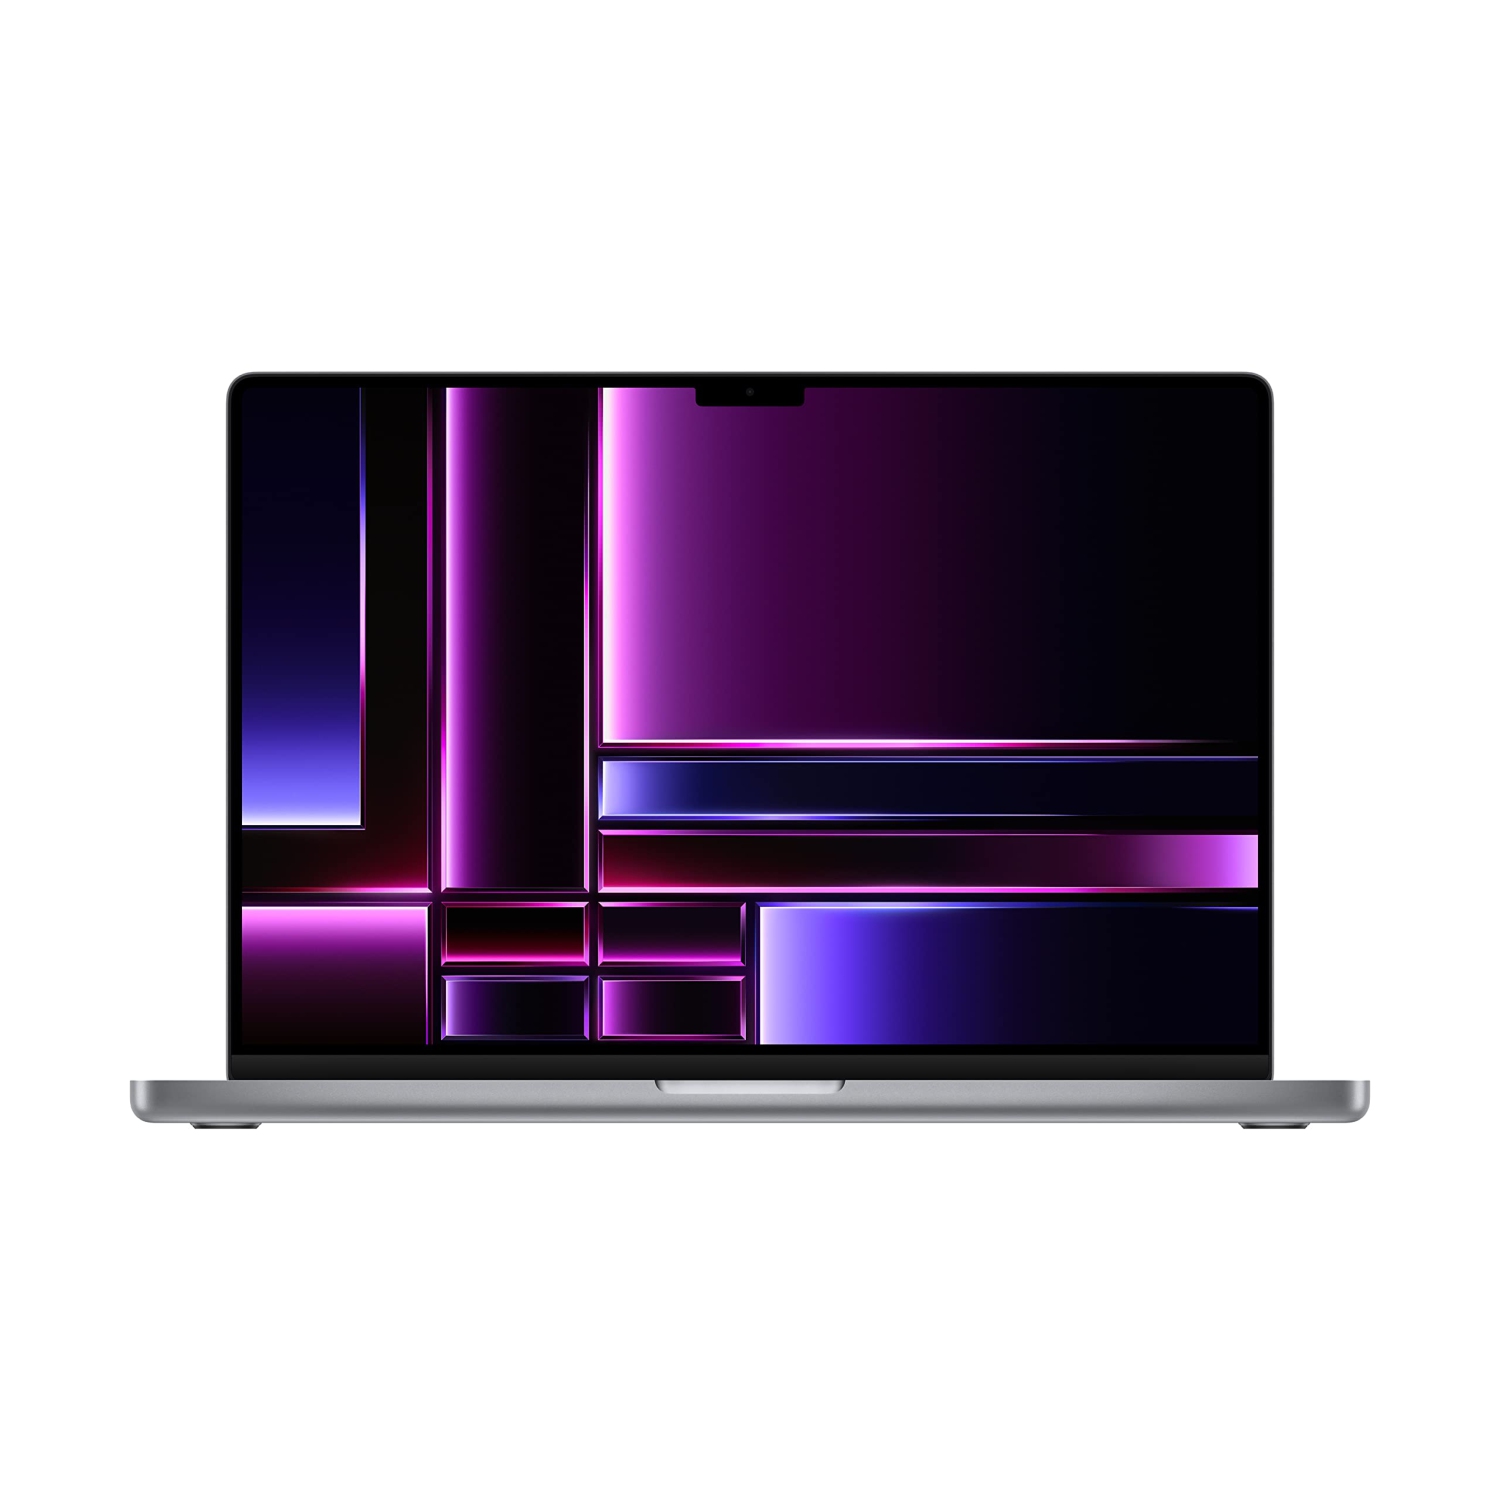 Refurbished (Excellent) - Apple 2023 16" MacBook Pro M2 Max chip, 32GB Unified Memory, 1TB SSD Storage (Space Gray)